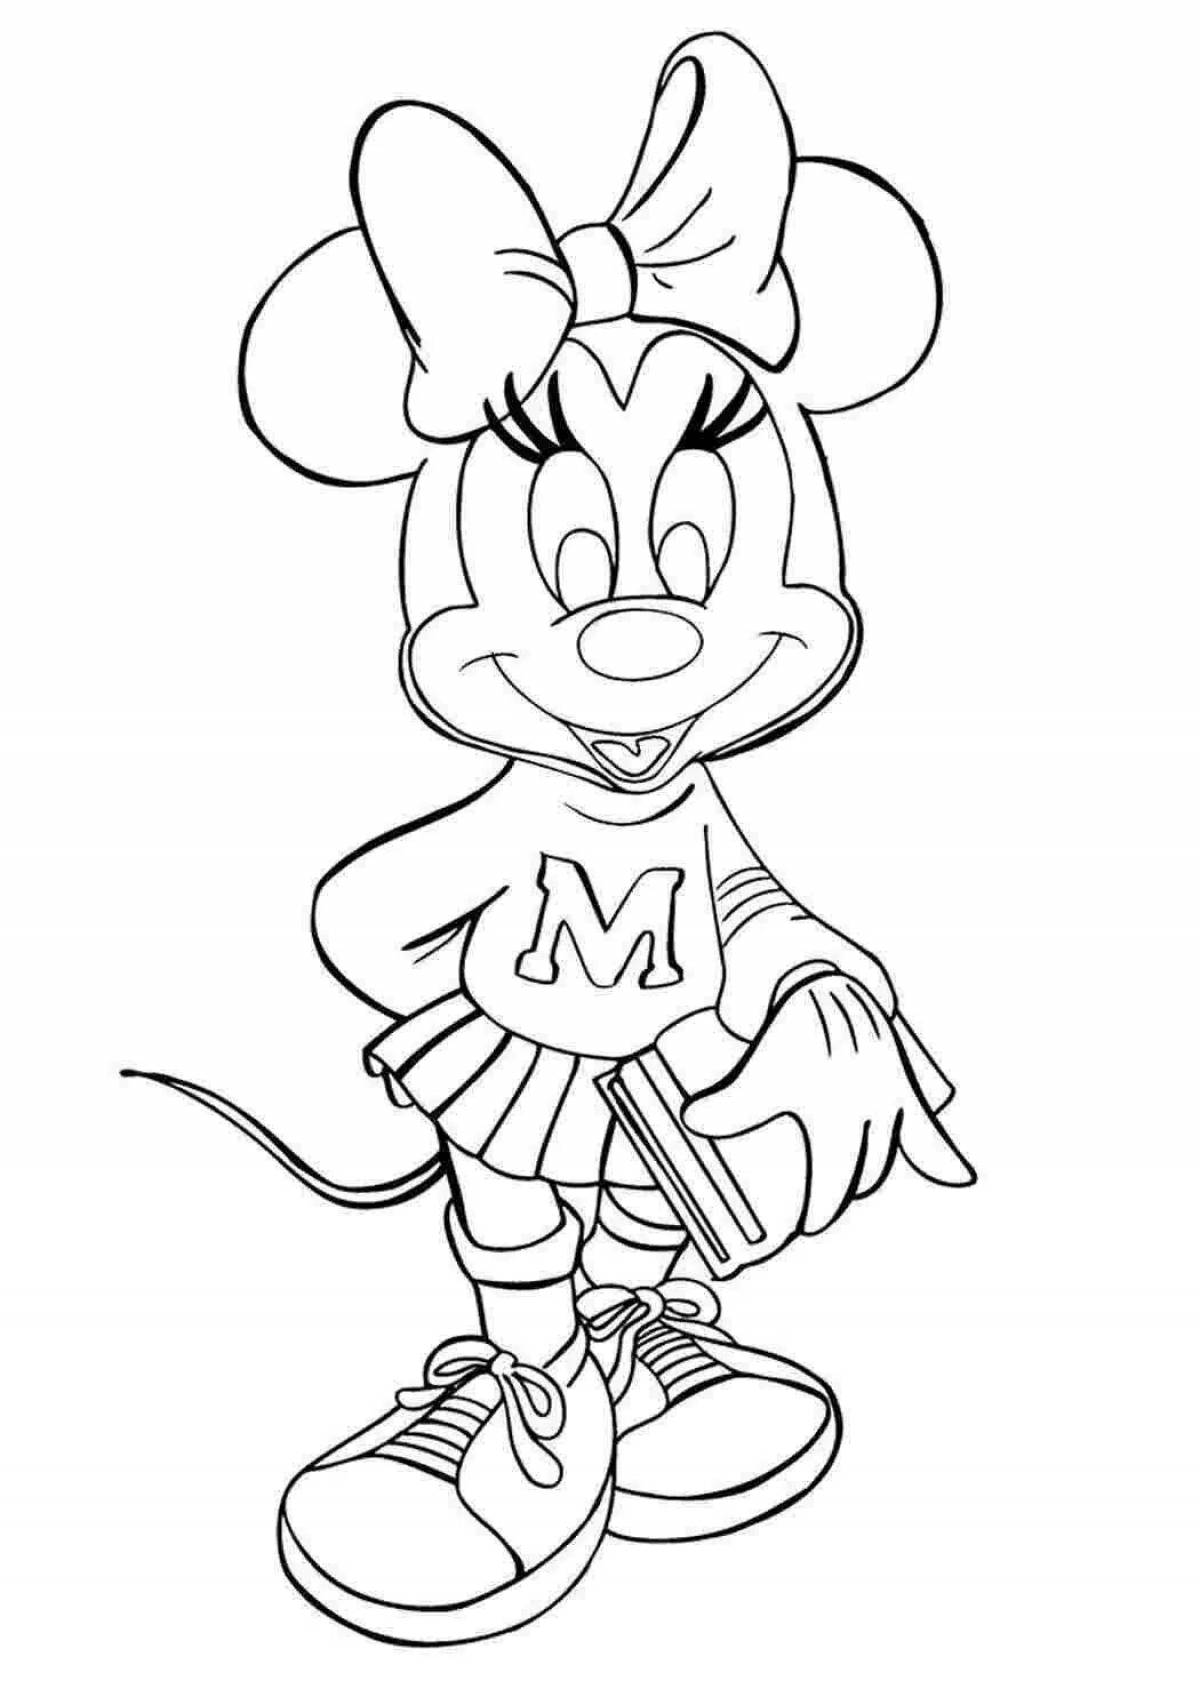 Colouring flawless minnie mouse